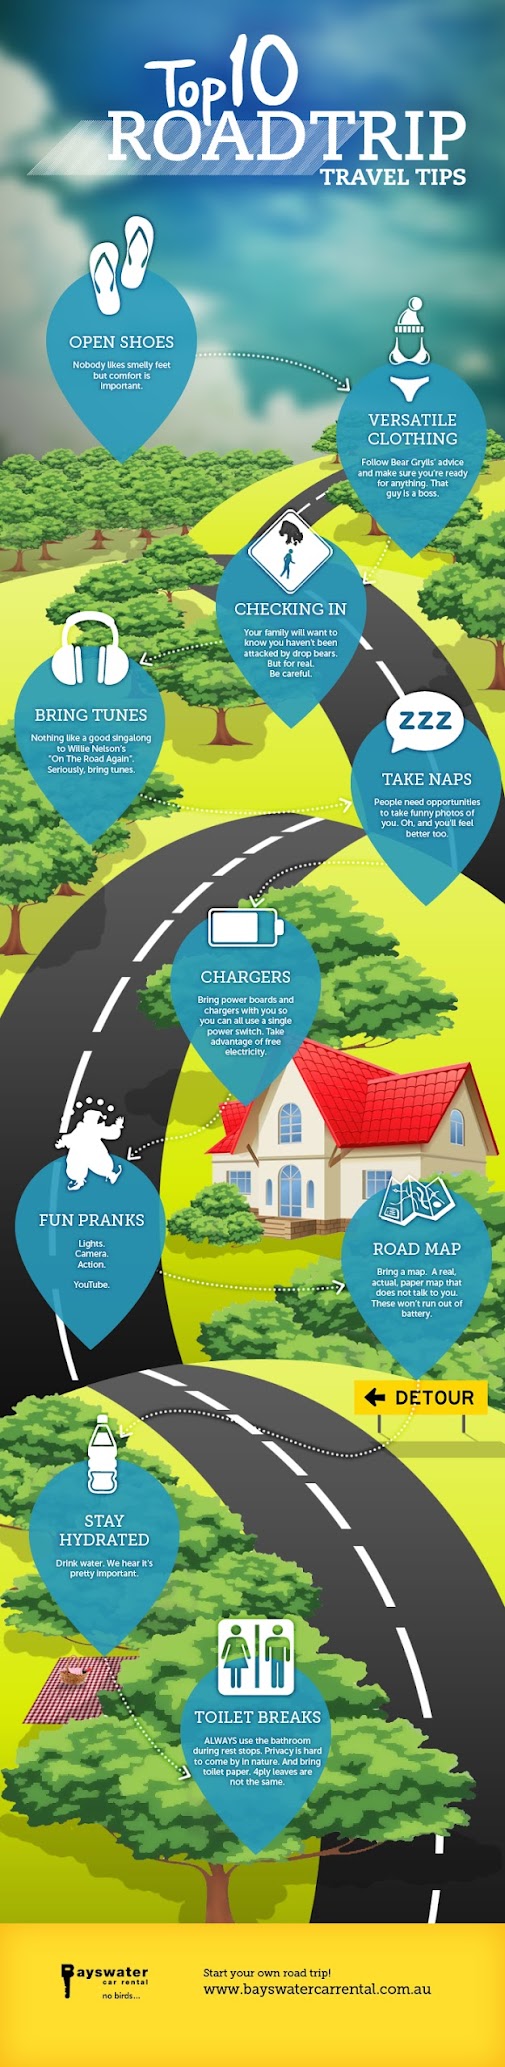 https://www.bayswatercarrental.com.au/Content/images/BayswaterInfographic.jpg